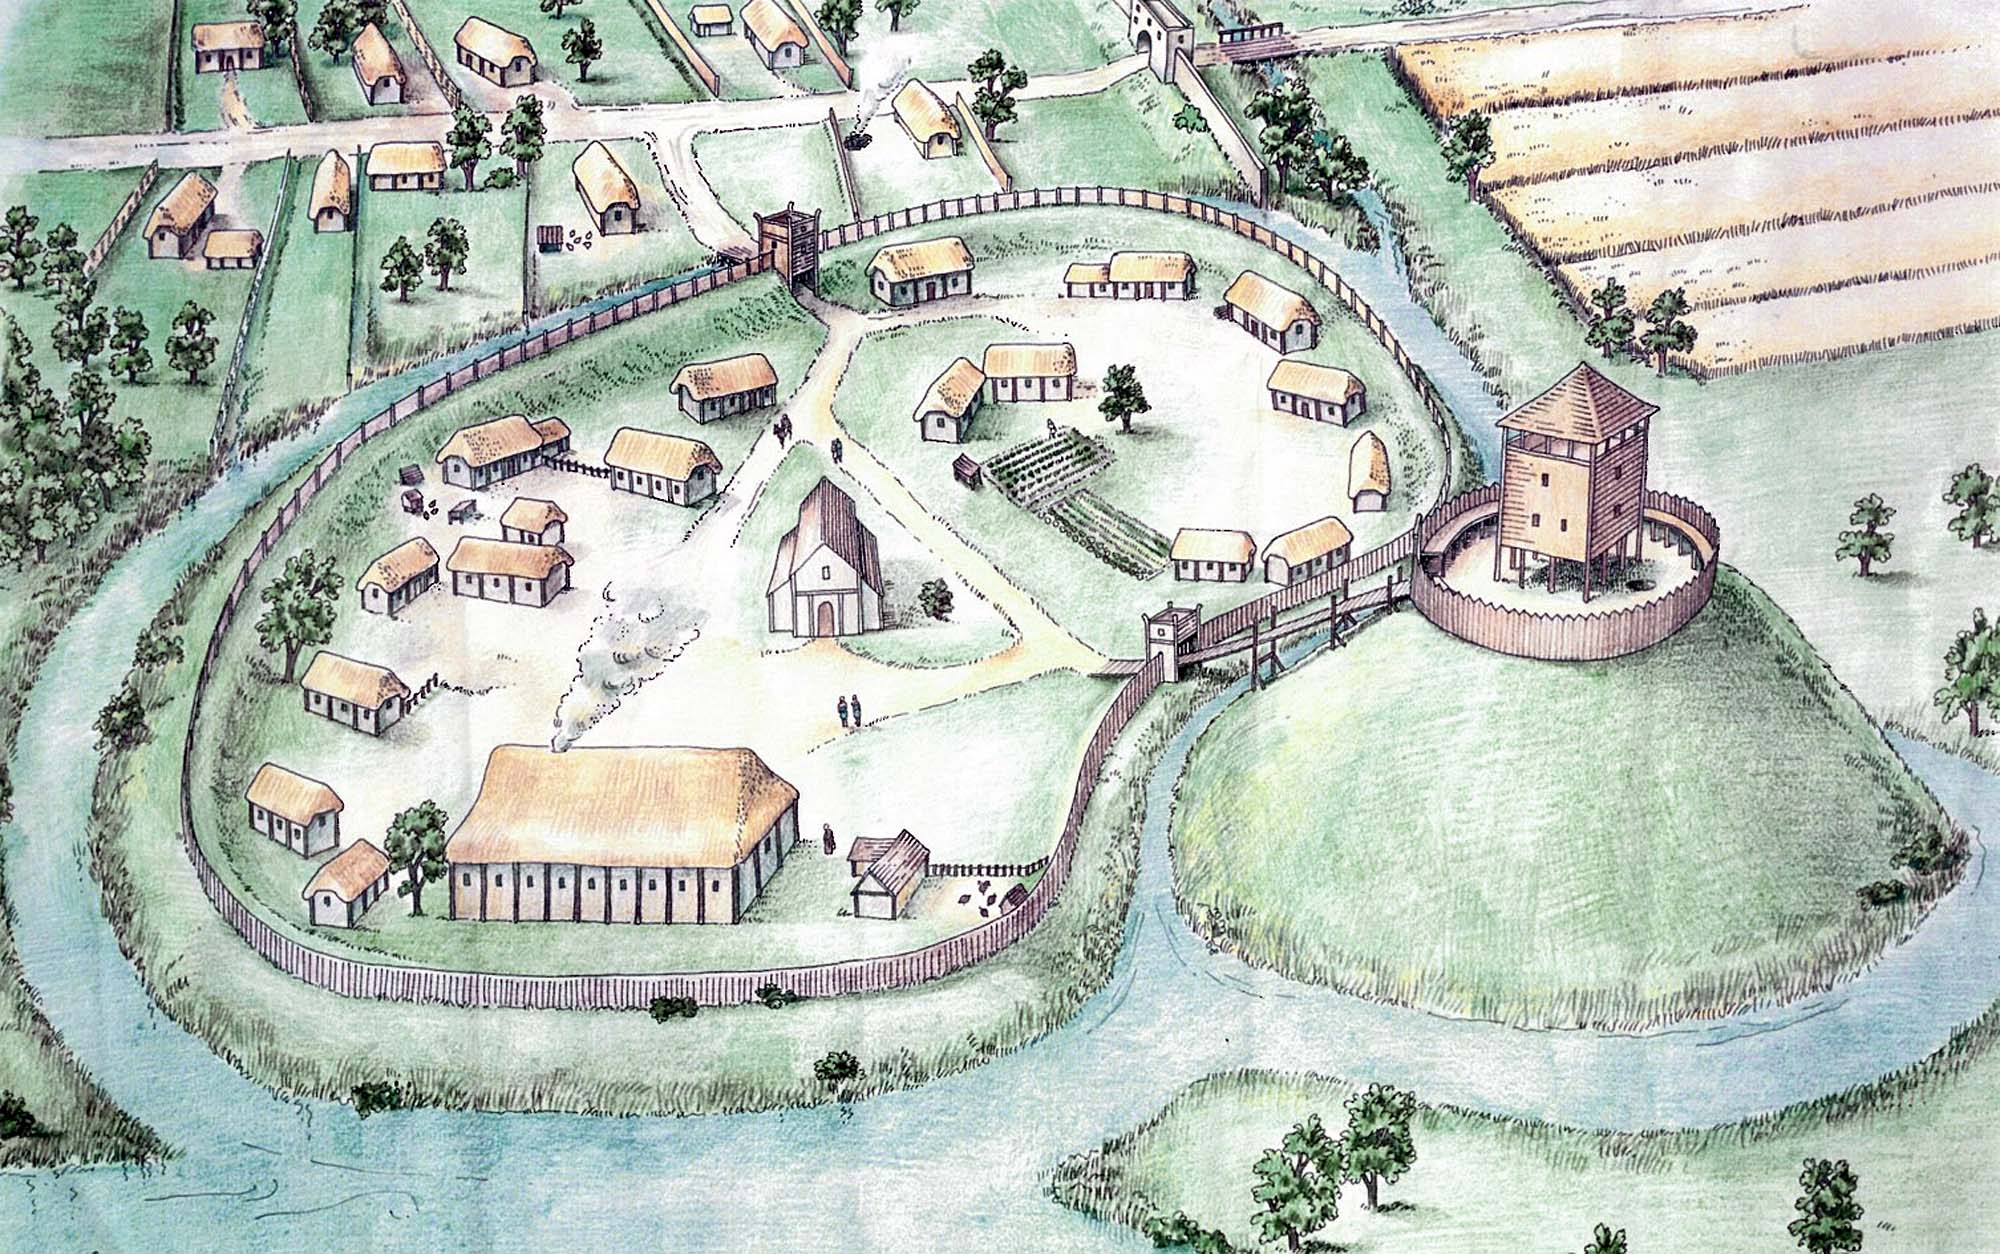 At artist’s impression of Leicester Castle as it may have looked c.1068 - Sarah Geeves